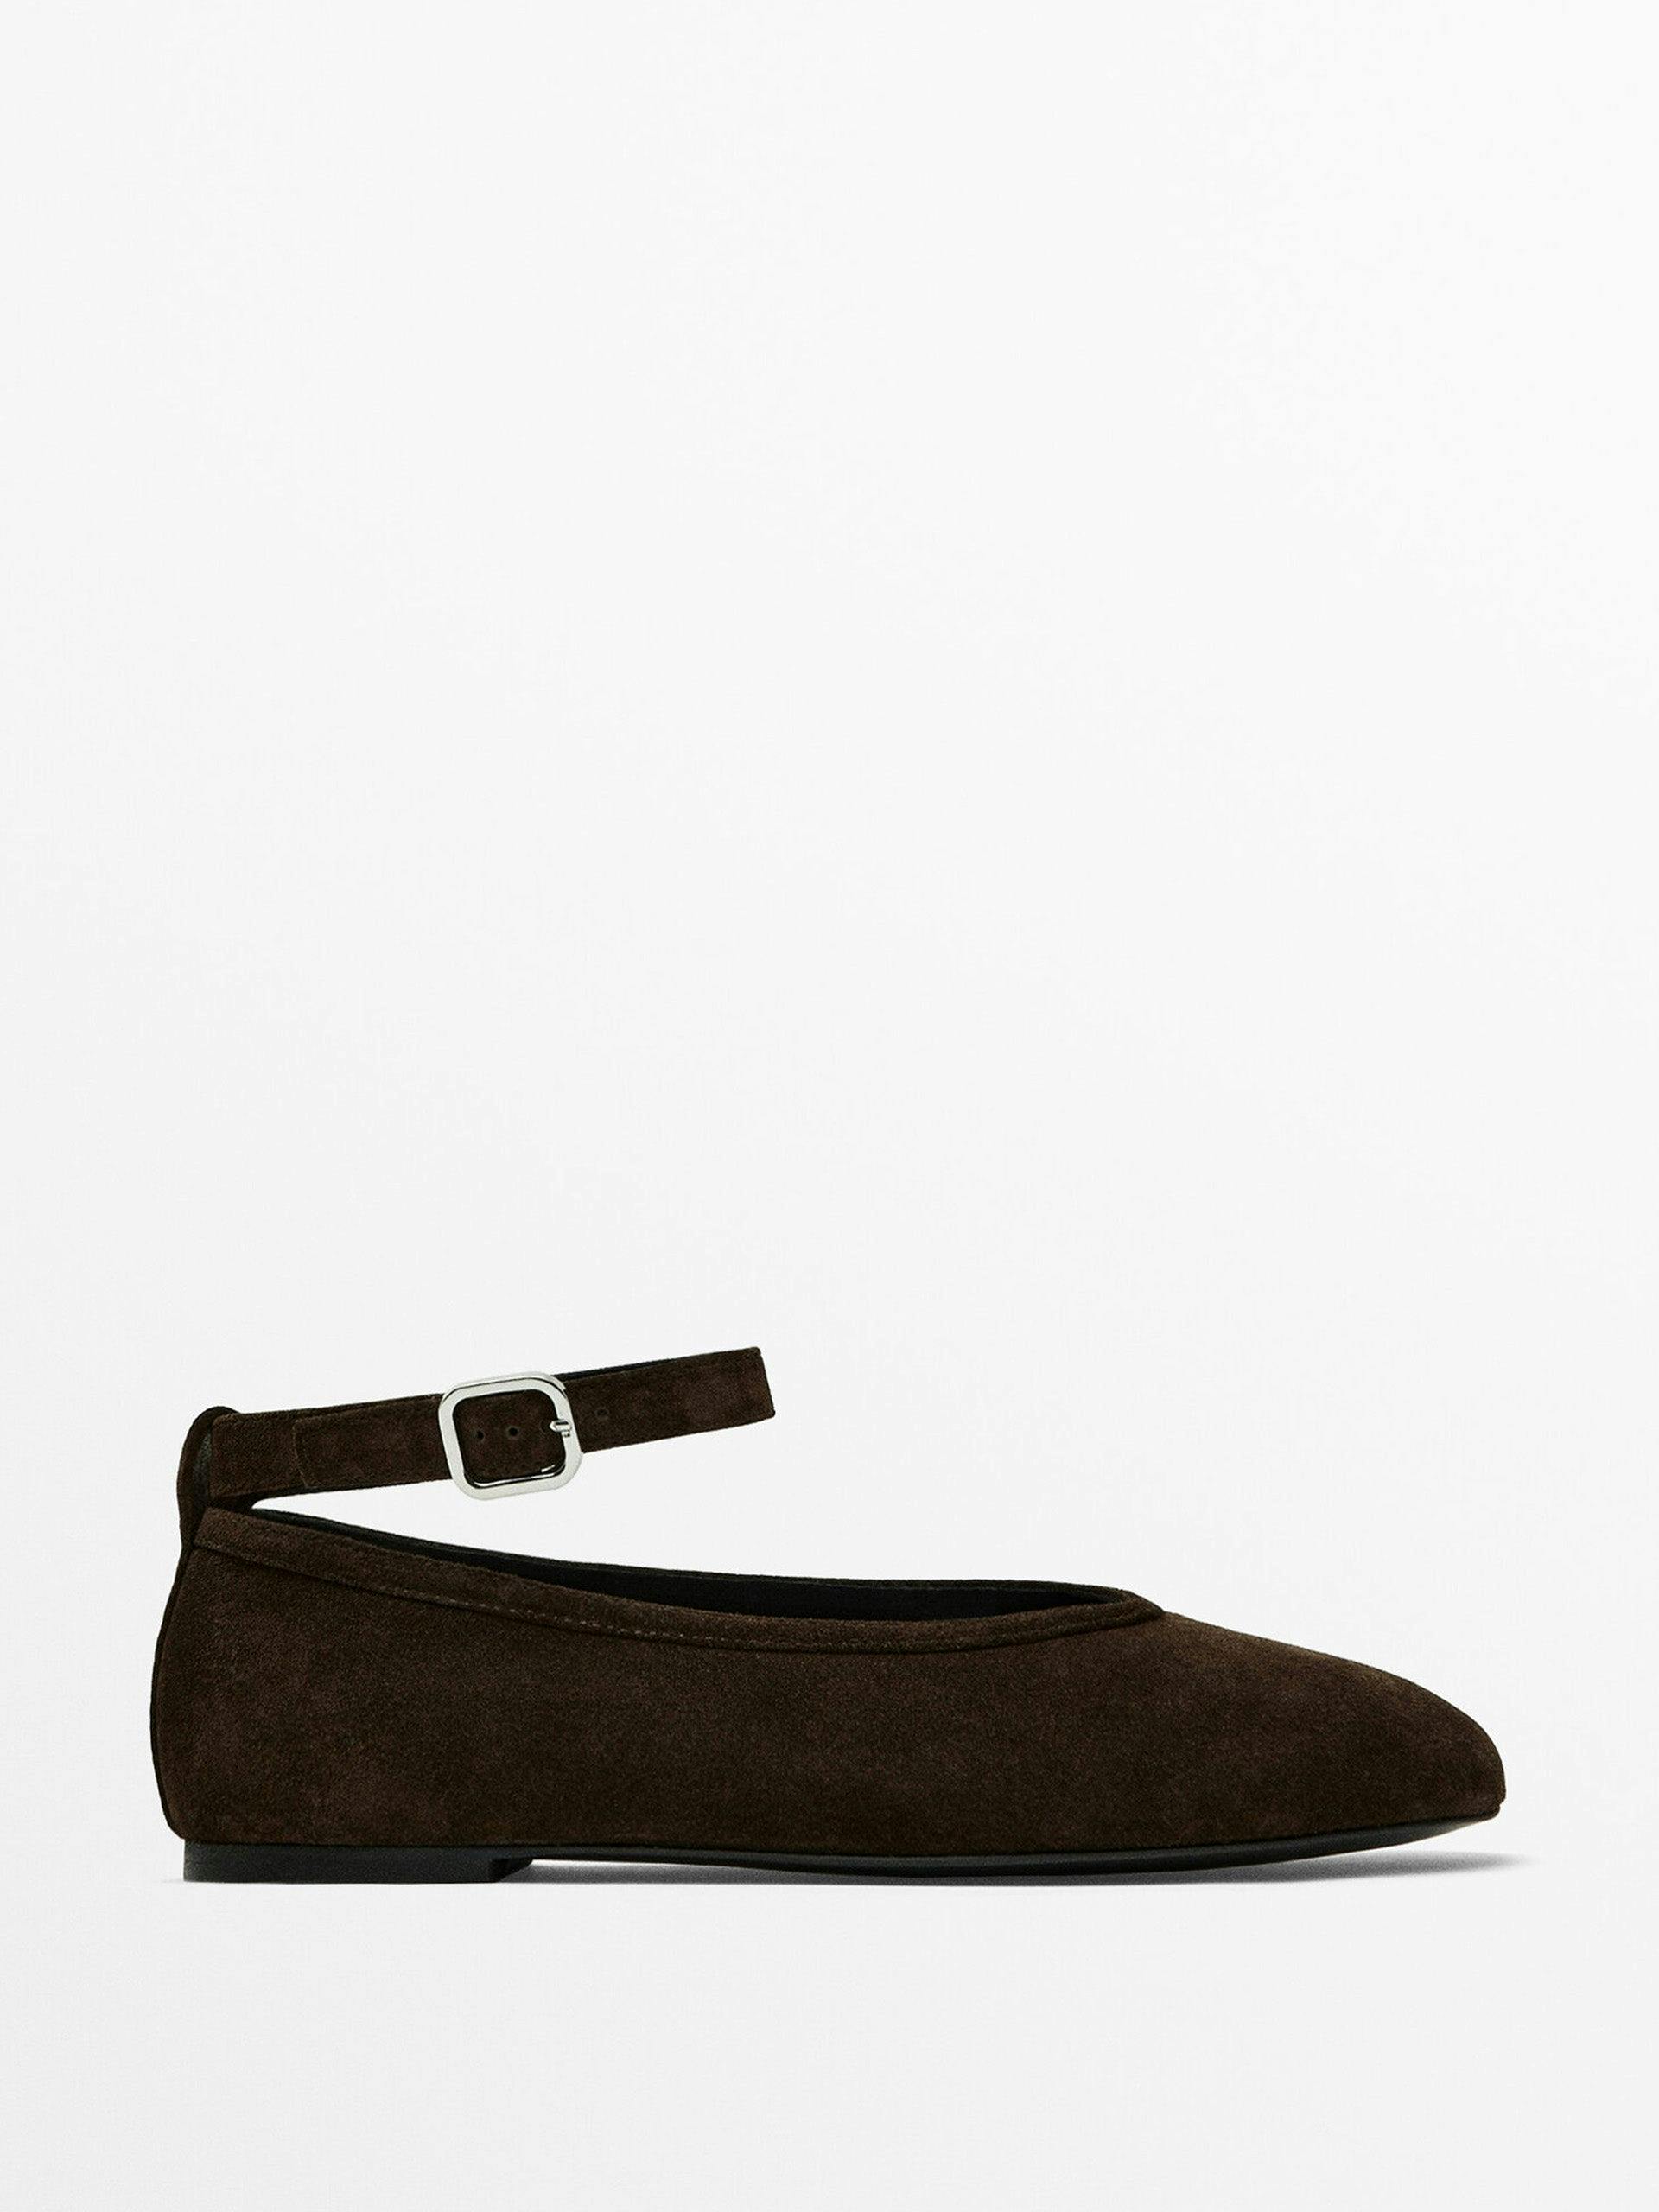 Ballet flats with detachable strap